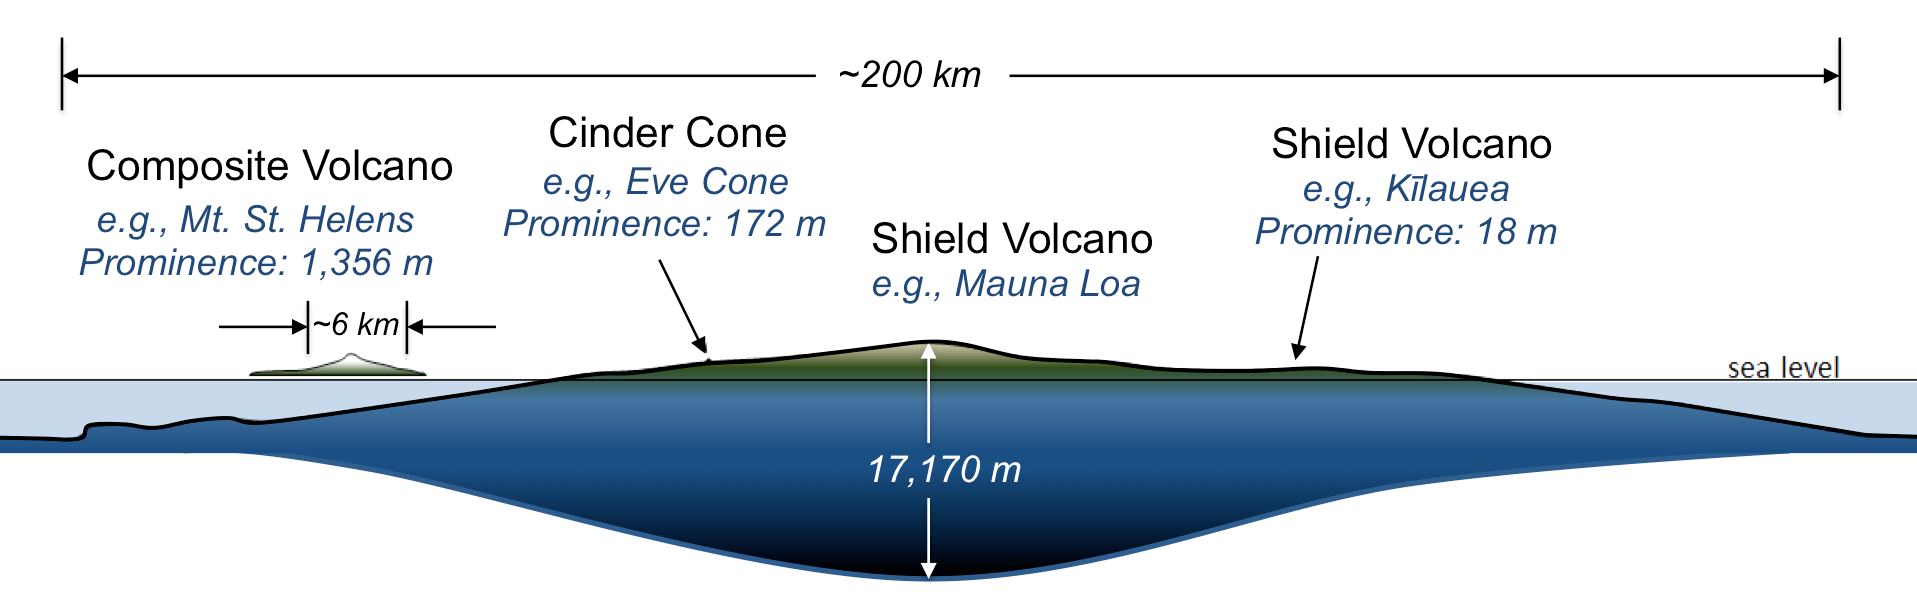 Comparison of volcano sizes and shapes. Broad, rounded shield volcanoes are the largest, followed by cone-shaped composite volcanoes. Straight-sided cinder cones are the smallest, and barely visible in the scale of the diagram. _Source: Karla Panchuk (2017) CC BY 4.0 modified after Steven Earle (2015) CC BY 4.0 [view original](https://opentextbc.ca/geology/wp-content/uploads/sites/110/2015/07/Mauna-Loa-shield.png)_